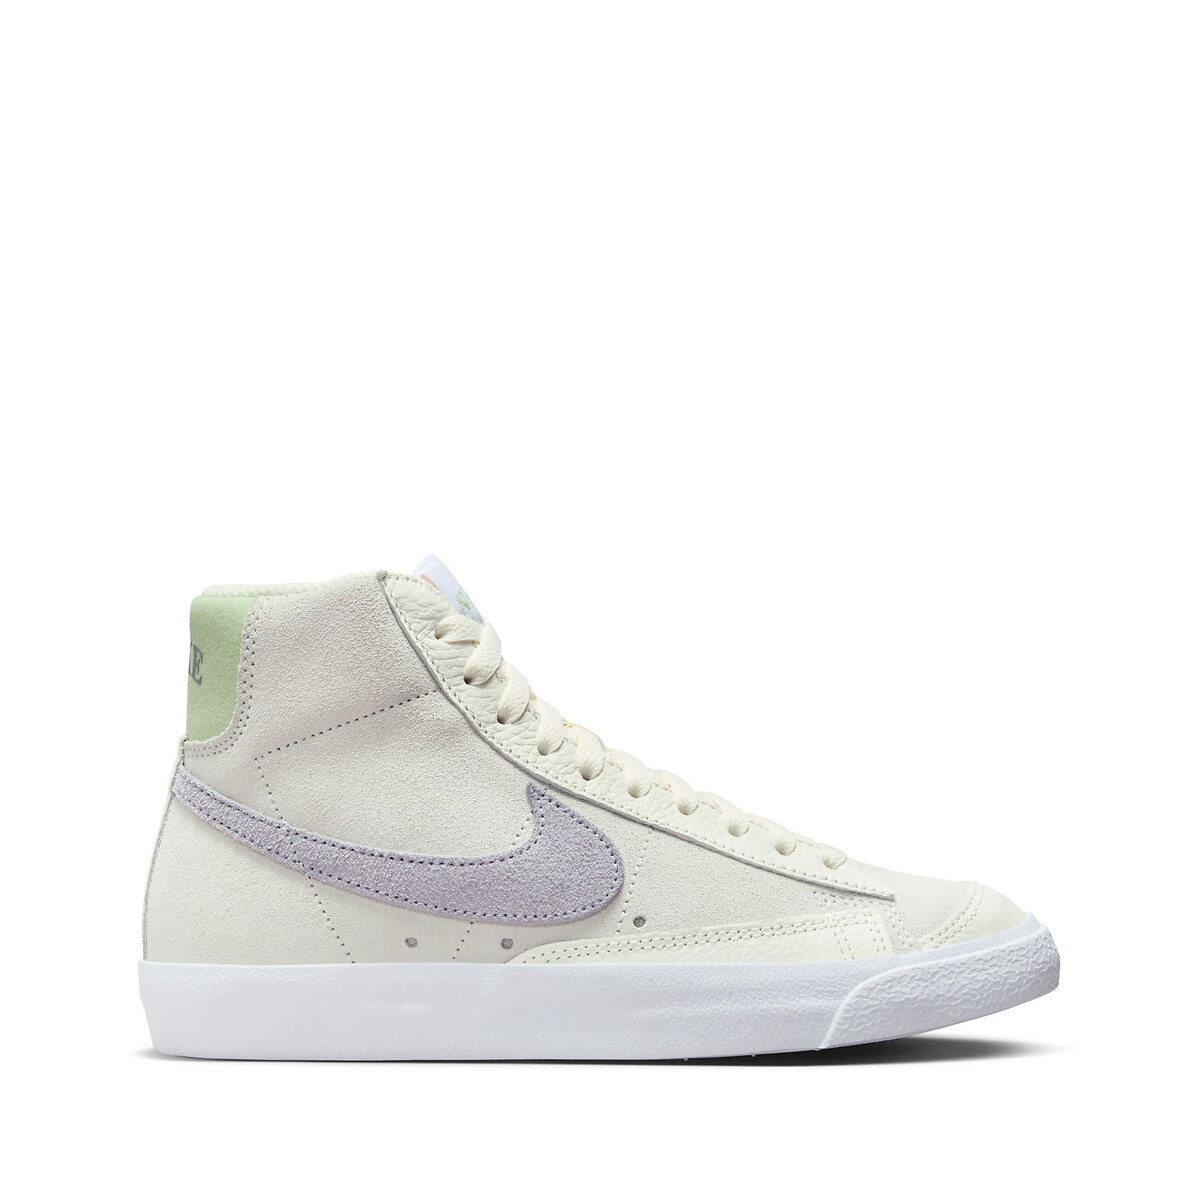 Blazer Mid ’77 High Top Trainers in Suede